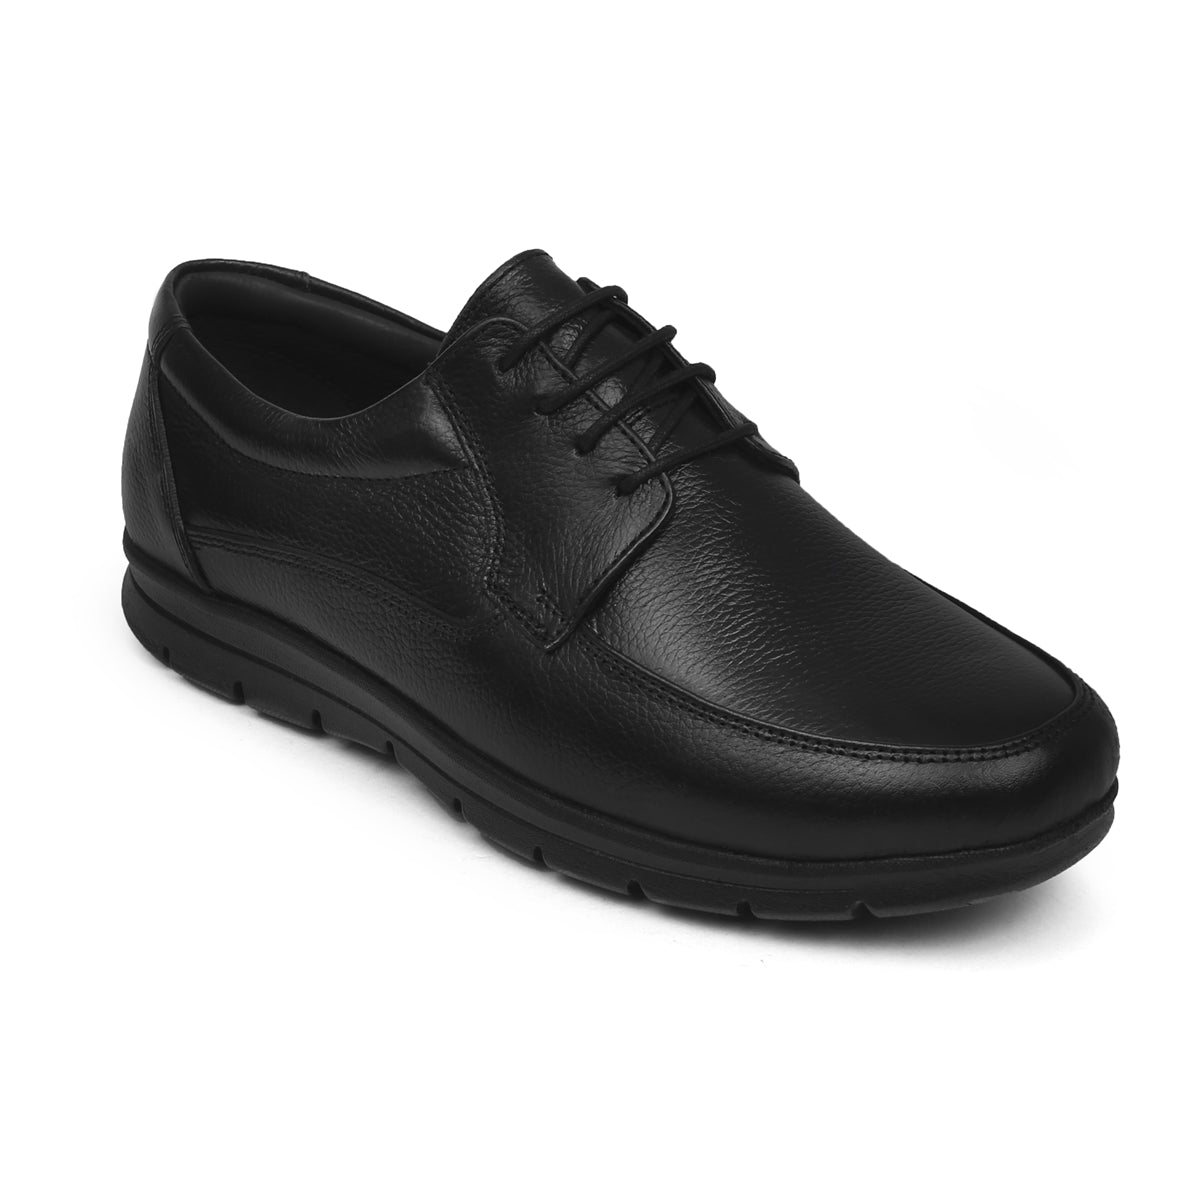 Casual Lace Up Shoes Mens Discount | medialit.org